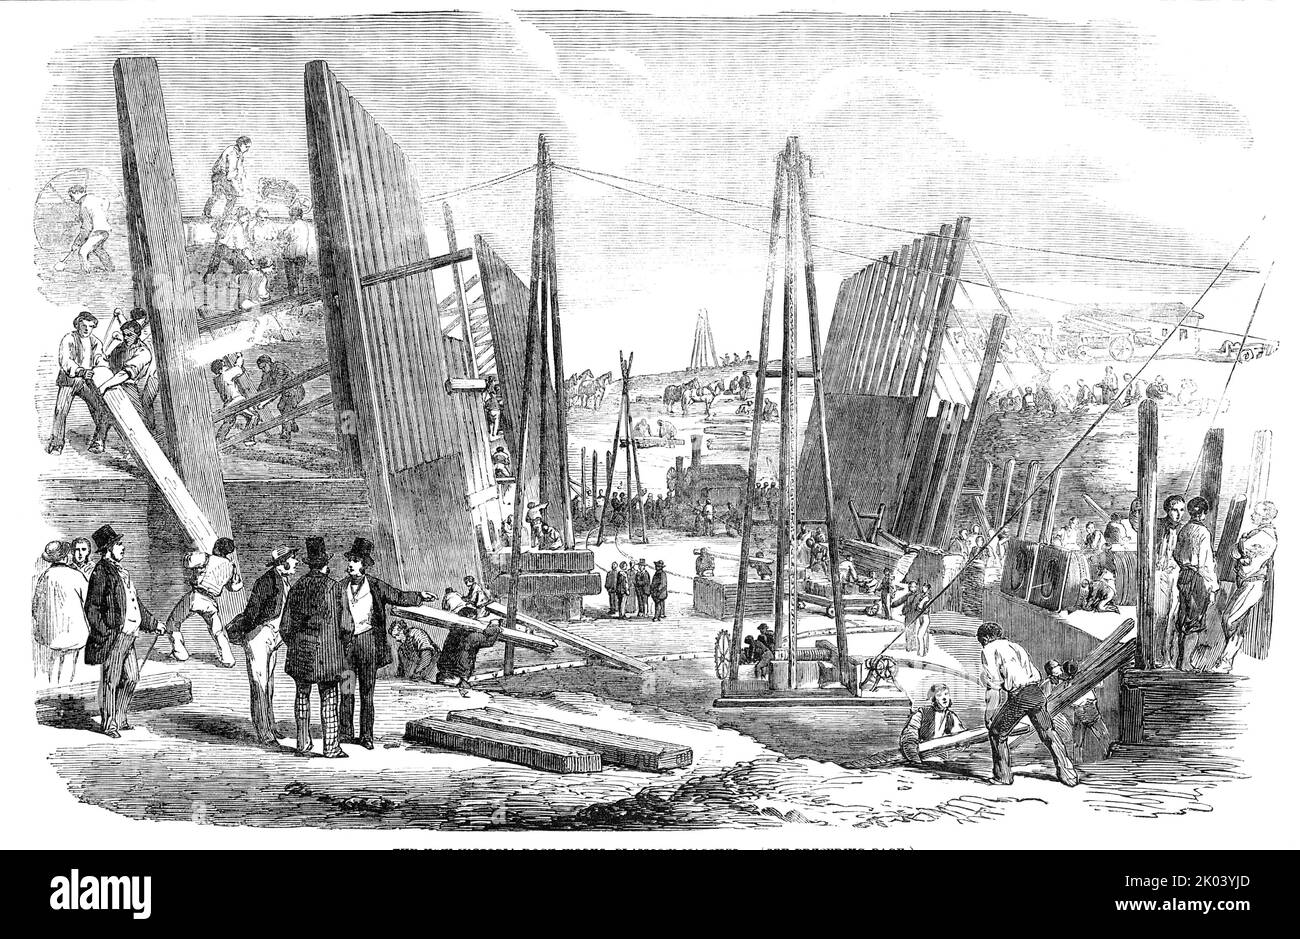 The New Victoria Dock Works, Plaistow Marshes, 1854. Expansion of the River Thames' shipping trade capacity by Peto, Brassey and Betts. The docks adjoin '...the North Woolwich Railway; by which they will have ready access to the heart of the City, and be placed in direct communication with all the great railways in the kingdom...The Western Dock and Tidal Basin will afford, together, an area of water accommodation of ninety acres, and upwards of a mile of Quay and Wharfage-room, together with 160,000 feet of fire-proof Warehouses, on a single floor, adapted for the reception of every descripti Stock Photo